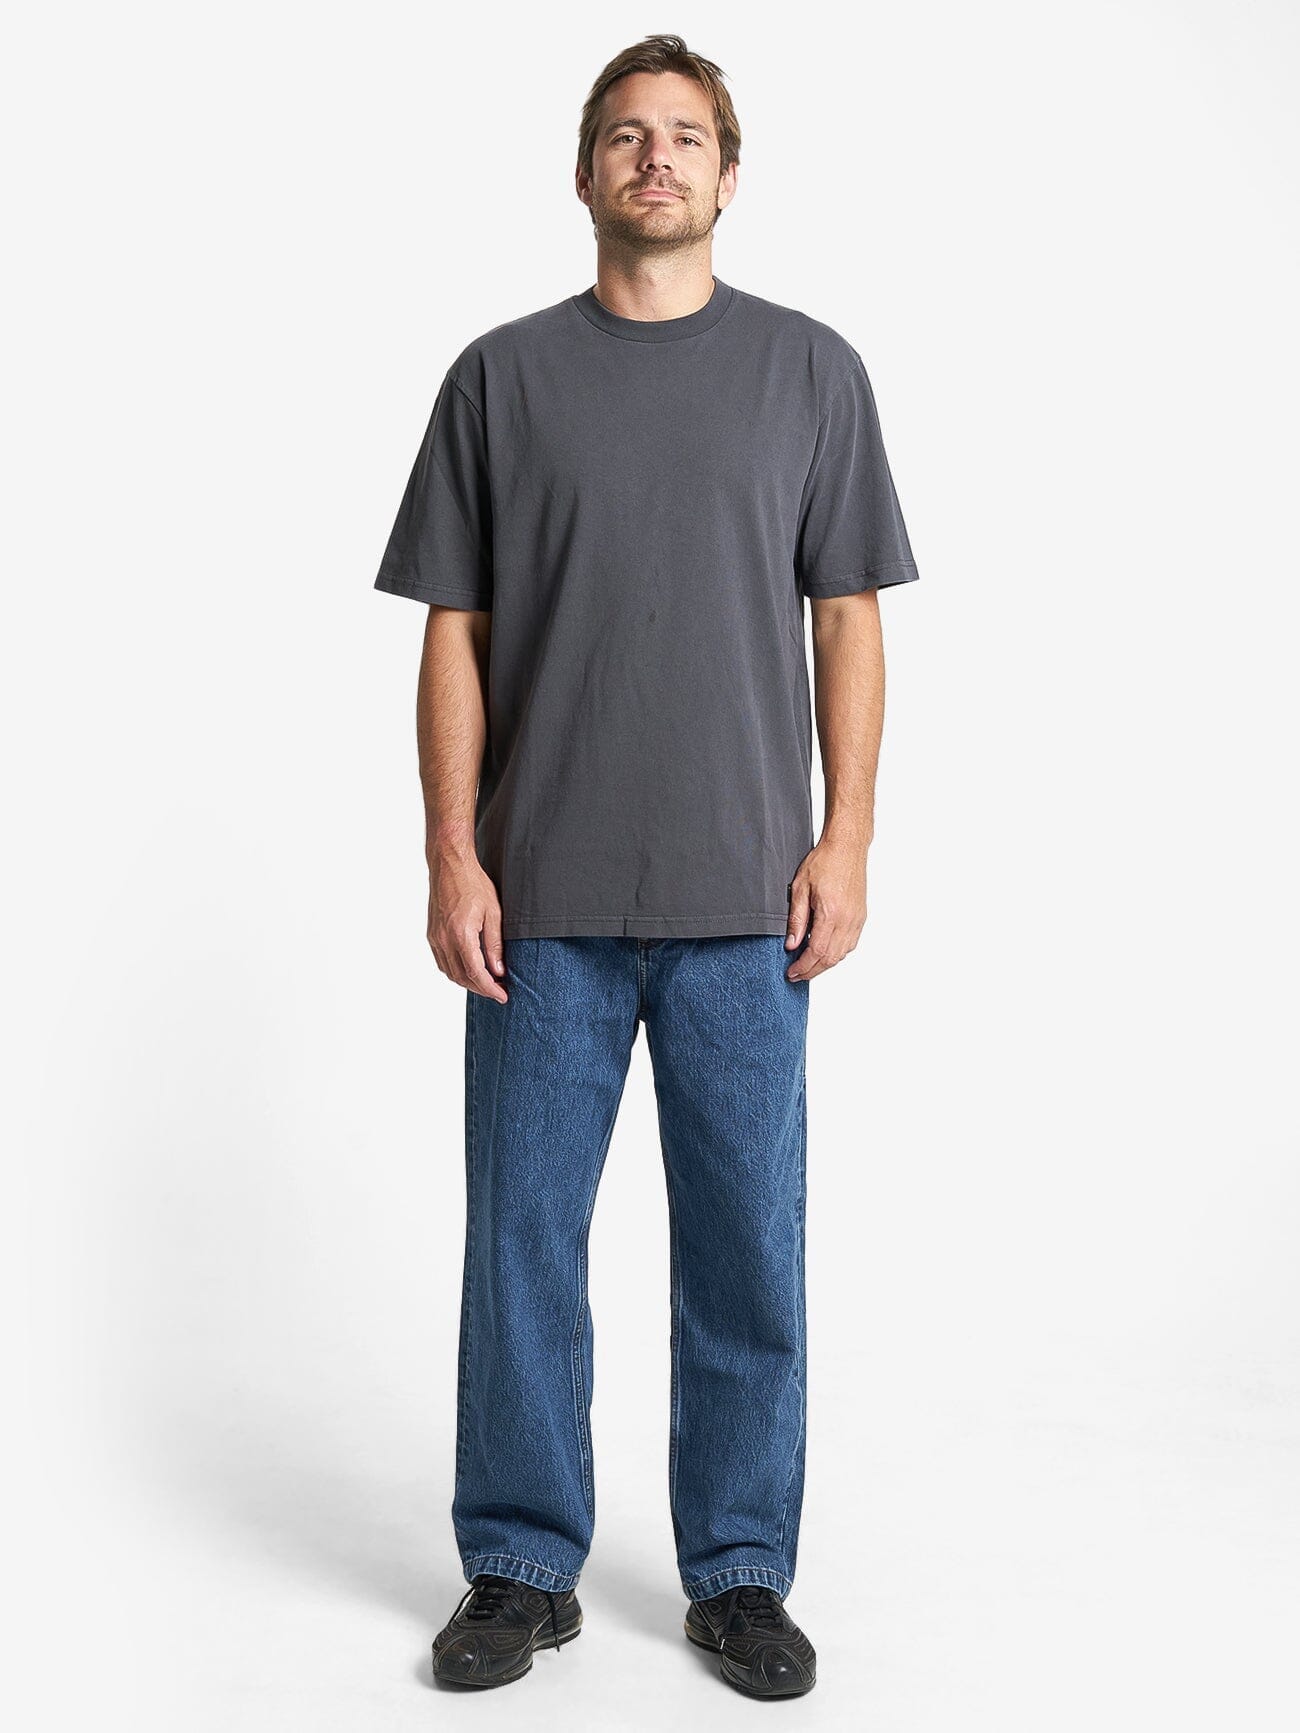 Thrills Military Oversize Fit Tee - Dark Charcoal